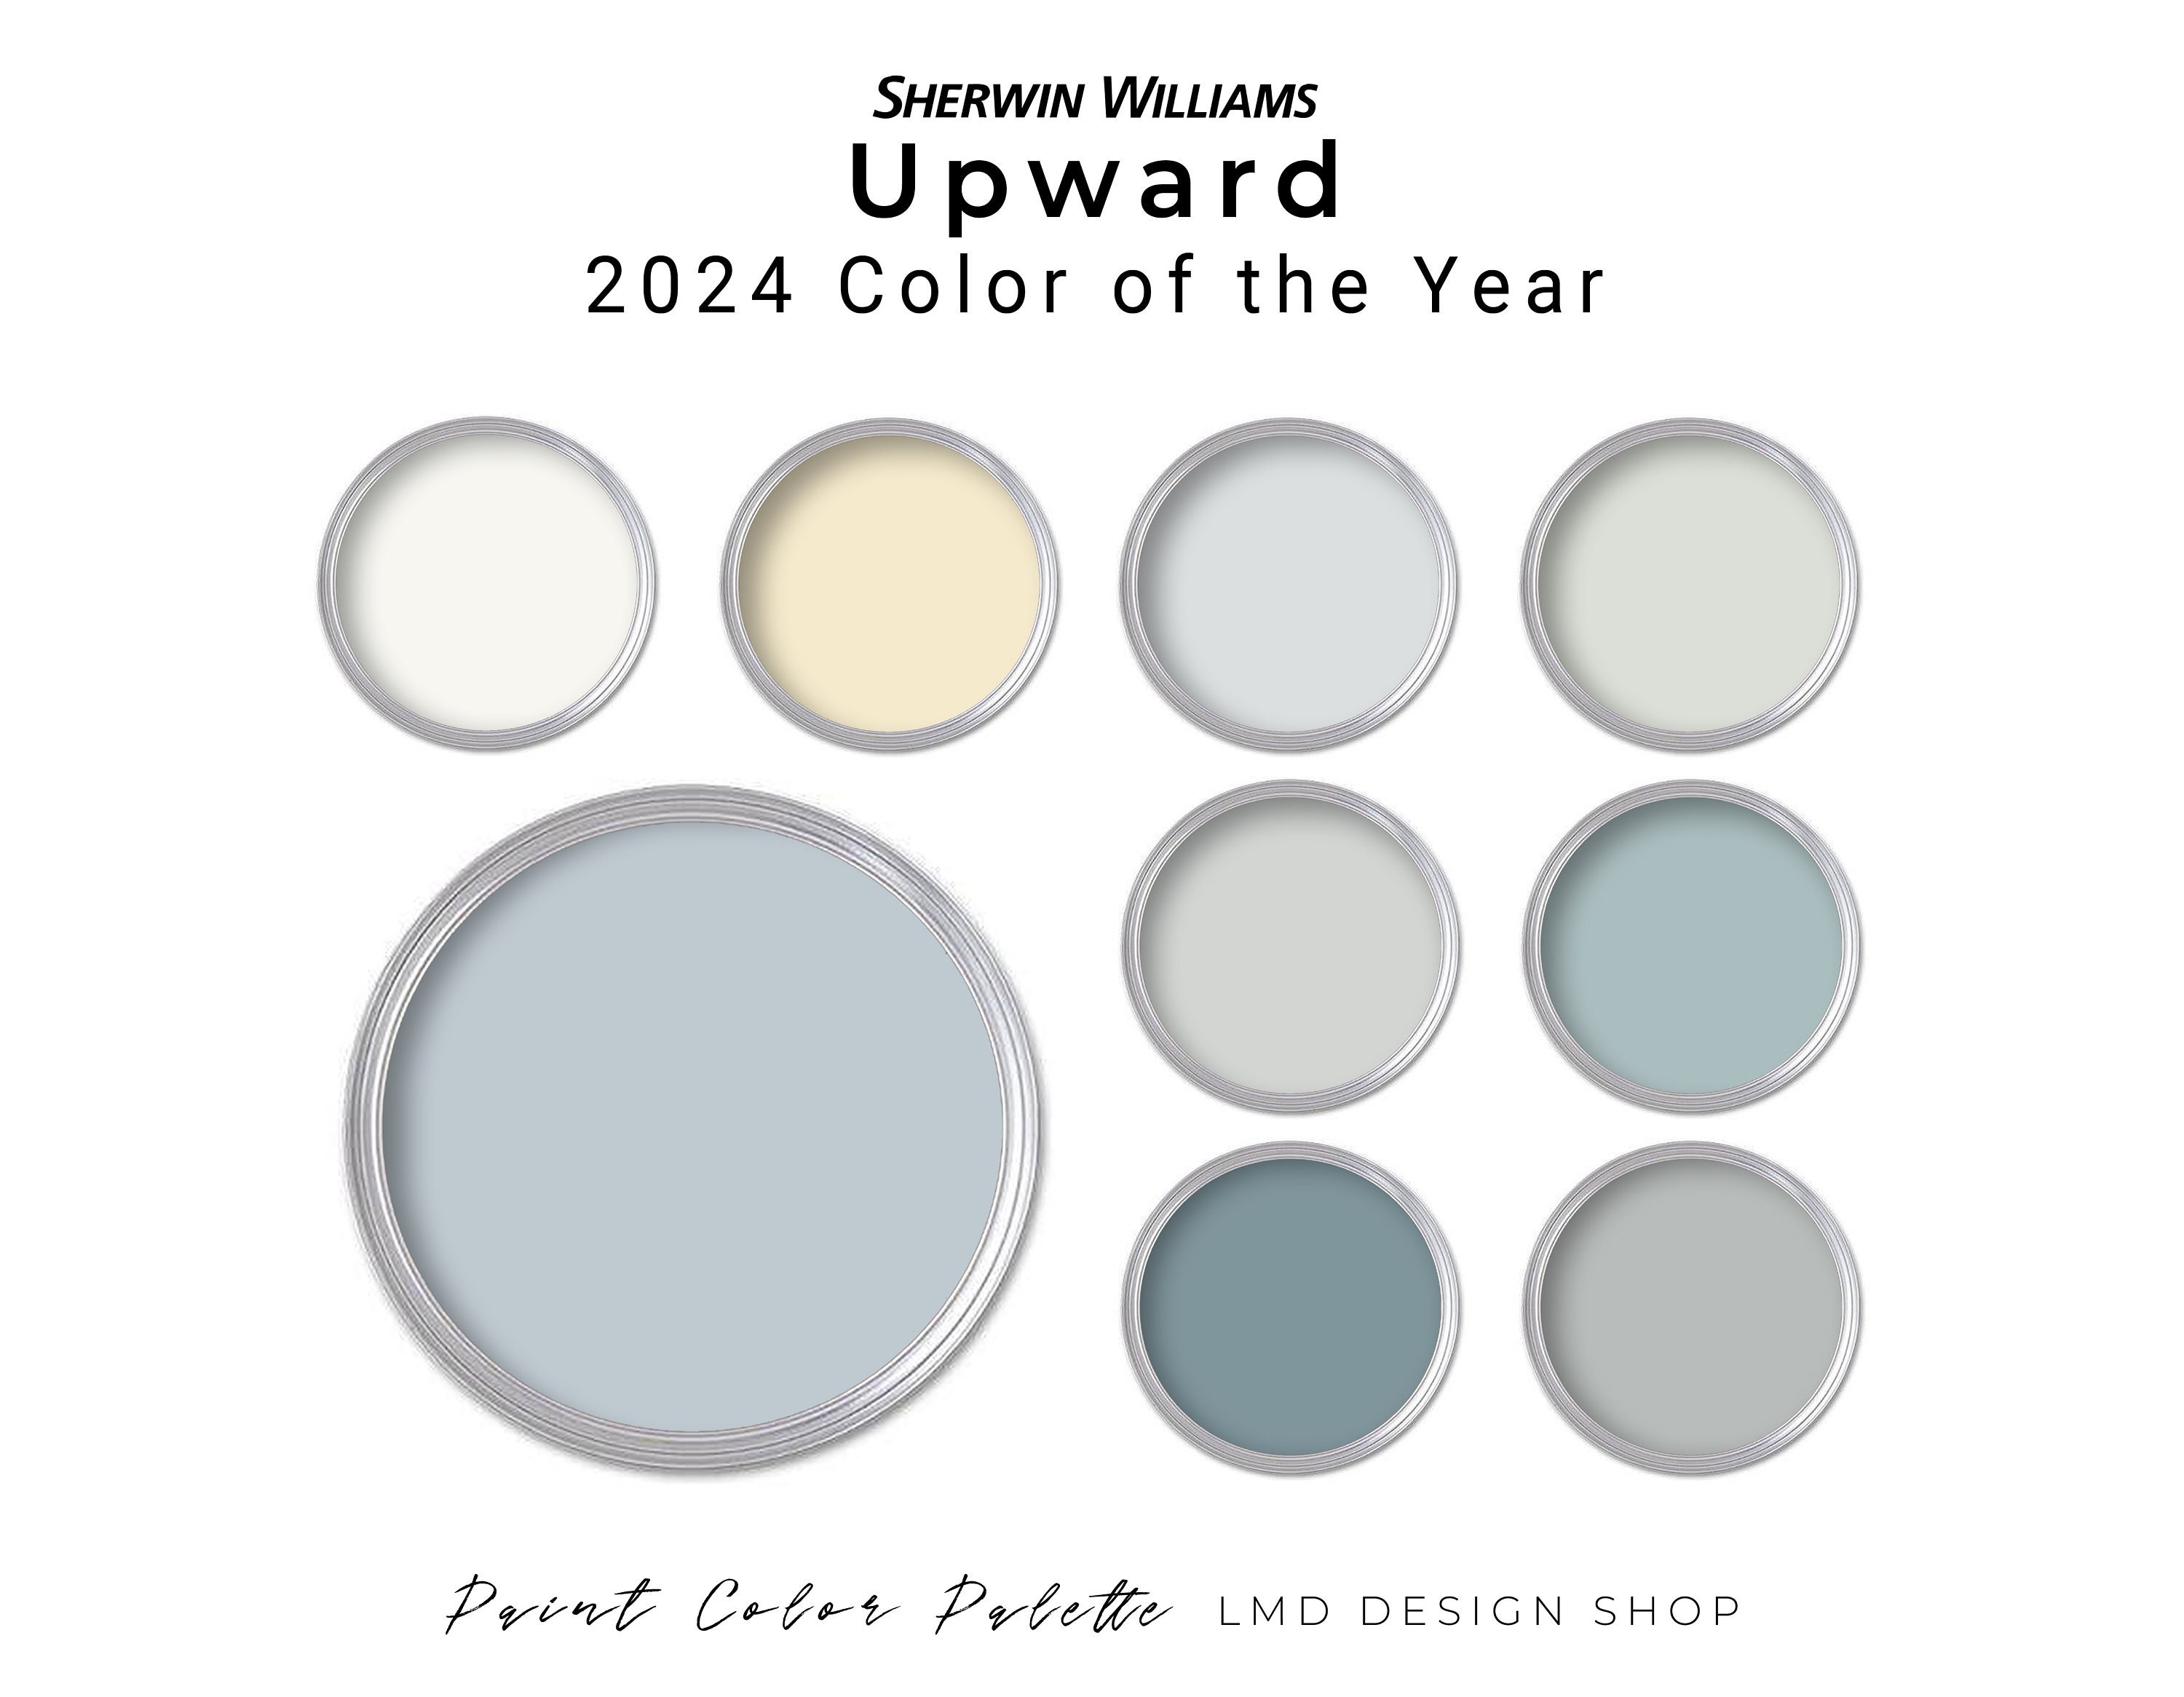 Sherwin Williams 2024 Color of the Year Upward Paint Pallette Whole